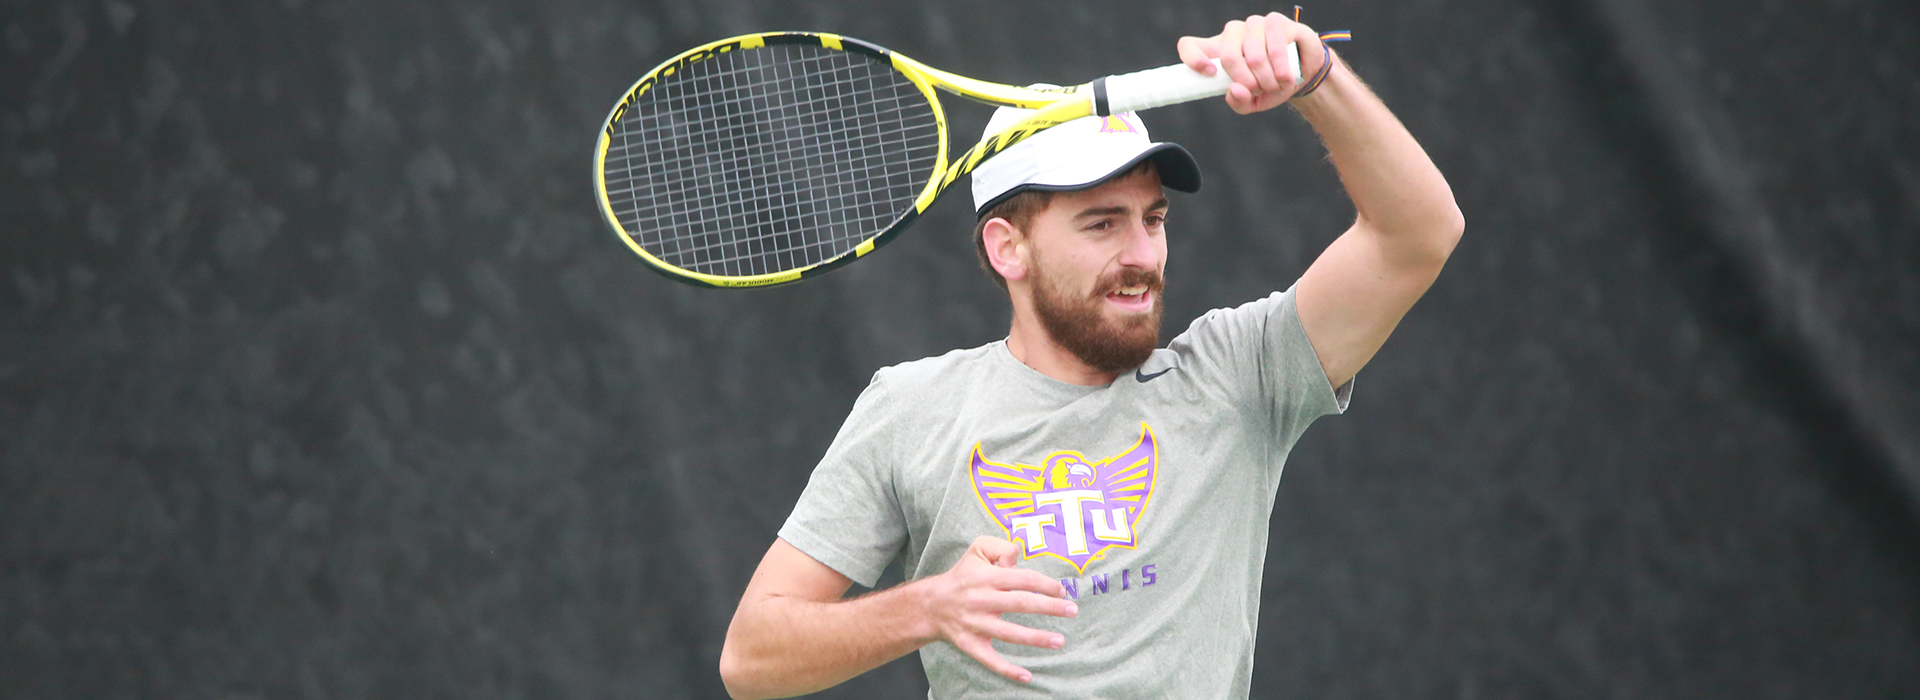 Golden Eagles close out non-conference slate with 4-2 win at UAB